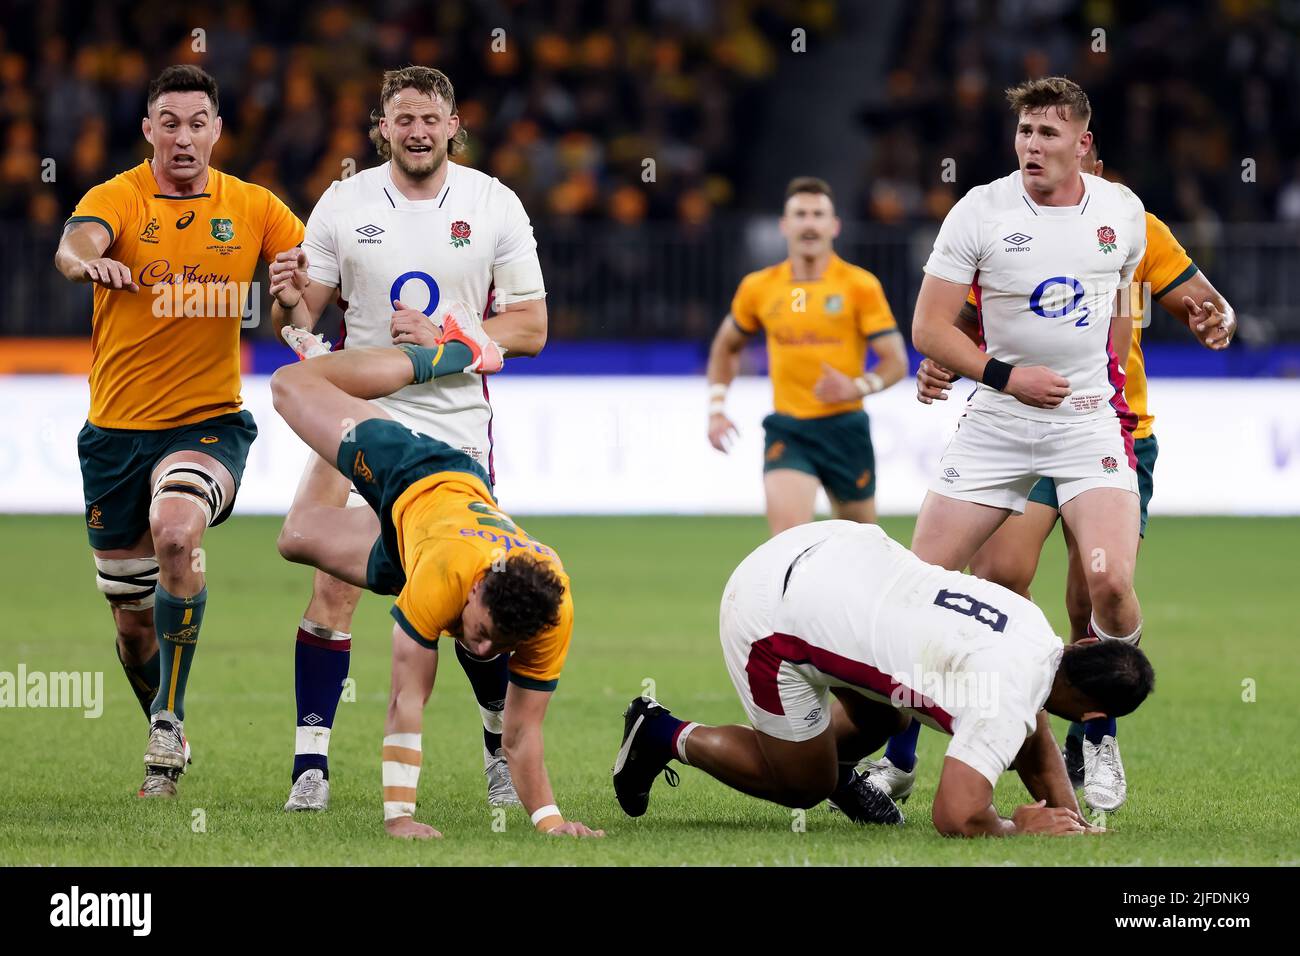 Perth, Australia, 2 July, 2022. Tom Banks of the Wallabies is injured during the rugby international test match between the Australia Wallabies and England at Optus Stadium on July 02, 2022 in Perth, Australia. Credit: Graham Conaty/Speed Media/Alamy Live News Stock Photo